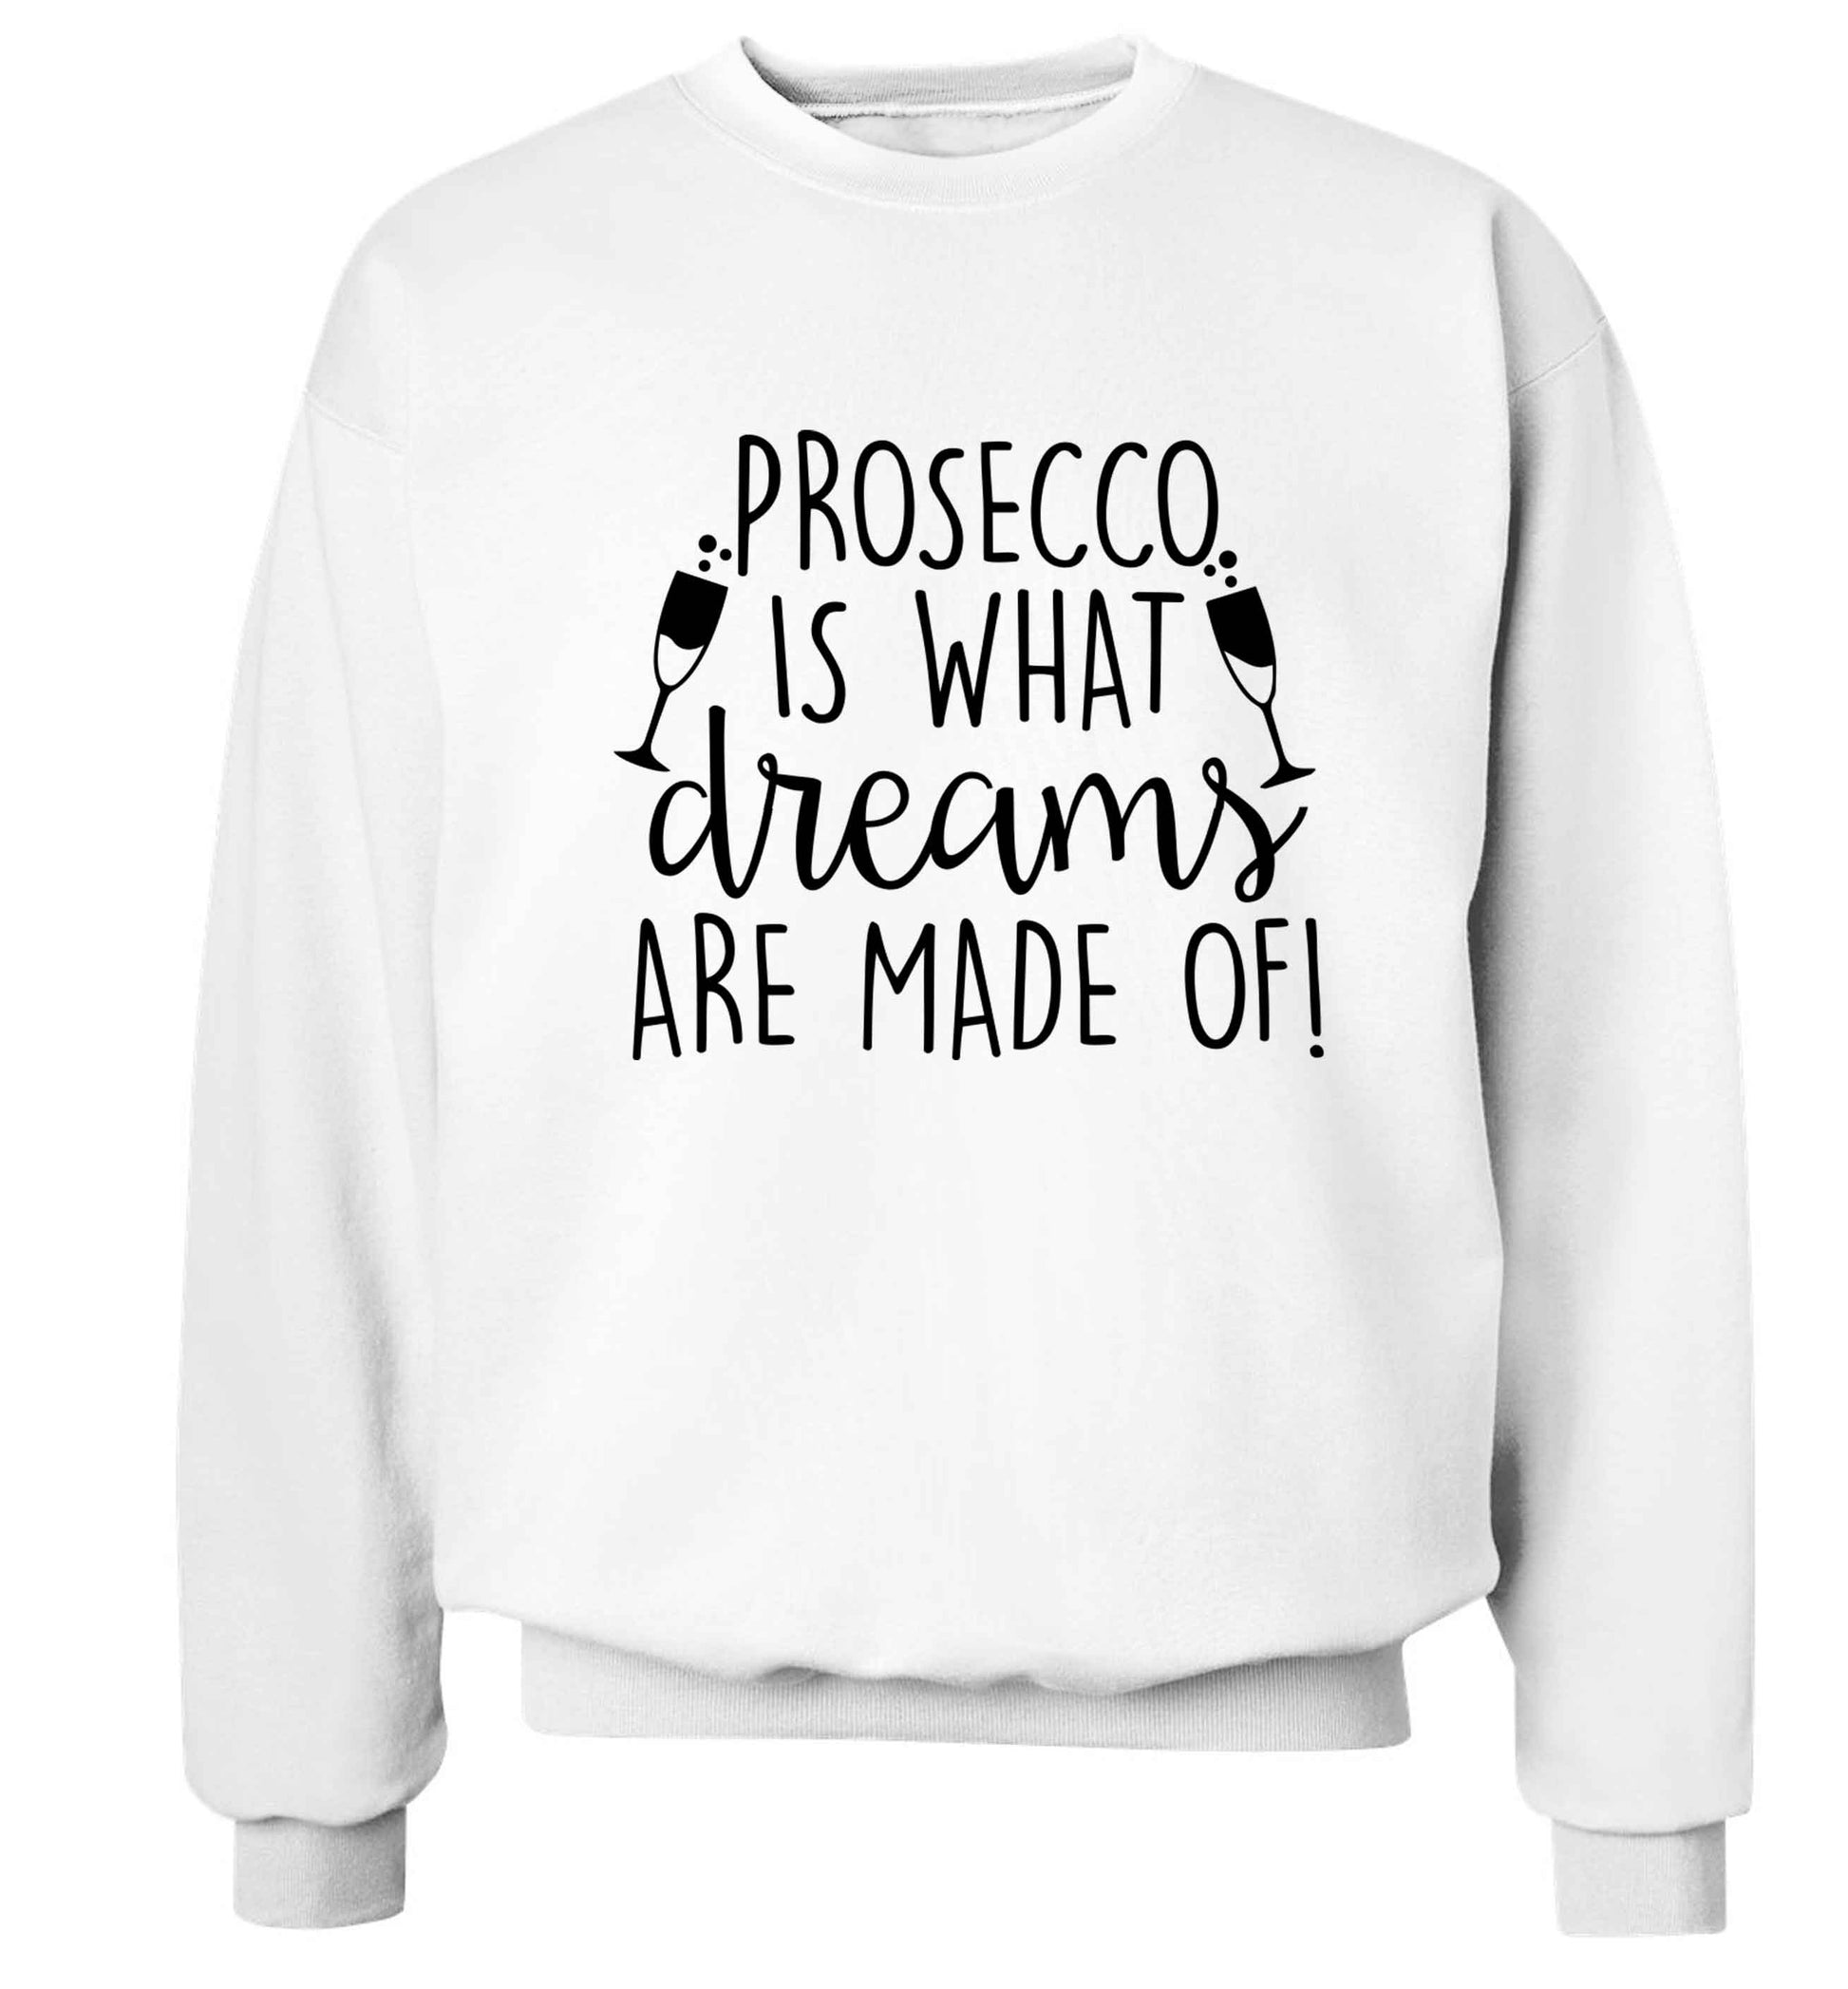 Prosecco is what dreams are made of Adult's unisex white Sweater 2XL